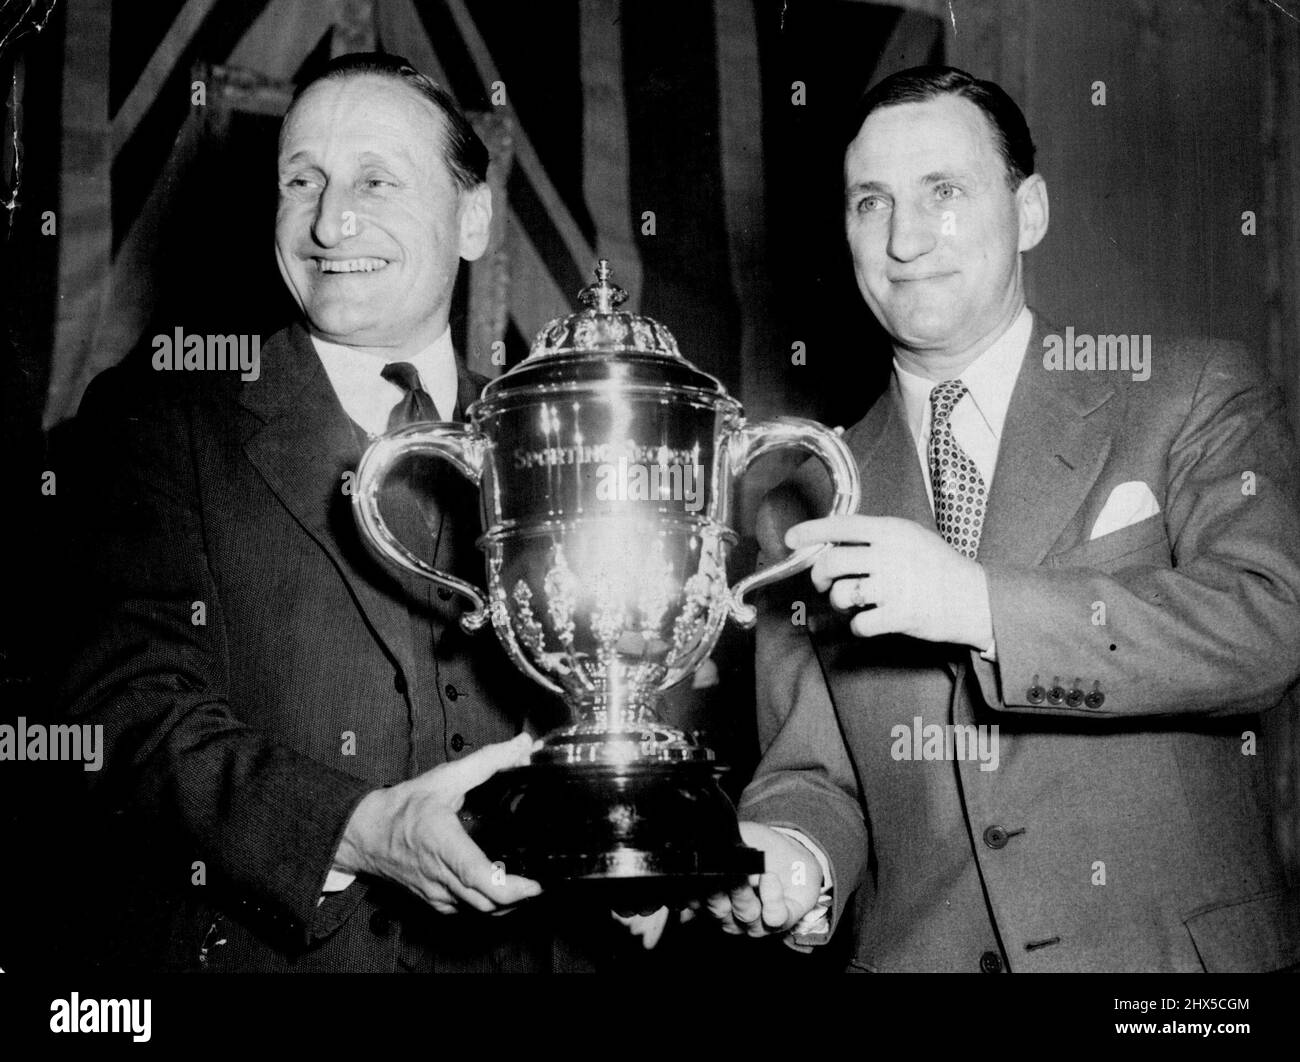 Len Hutton Receives Sportsman Of The Year Trophy -- Man who has batted his way to the top, Len Hutton, of Yorkshire, England's first professional cricket captain, is seen receiving from Lord Broughley left, at London's Savoy Hotel tonight (Monday) the 'Sportsman of the year' trophy awarded to him in the seventh annual national ballet organised by the 'Sporting Record'. Len Hutton is famous as one of the best opening batmen in the world. In the 1952 cricket averages he was shown to have scored 2567 runs in 45 innings. His highest innings score was 189. He made eleven centuries during the season Stock Photo